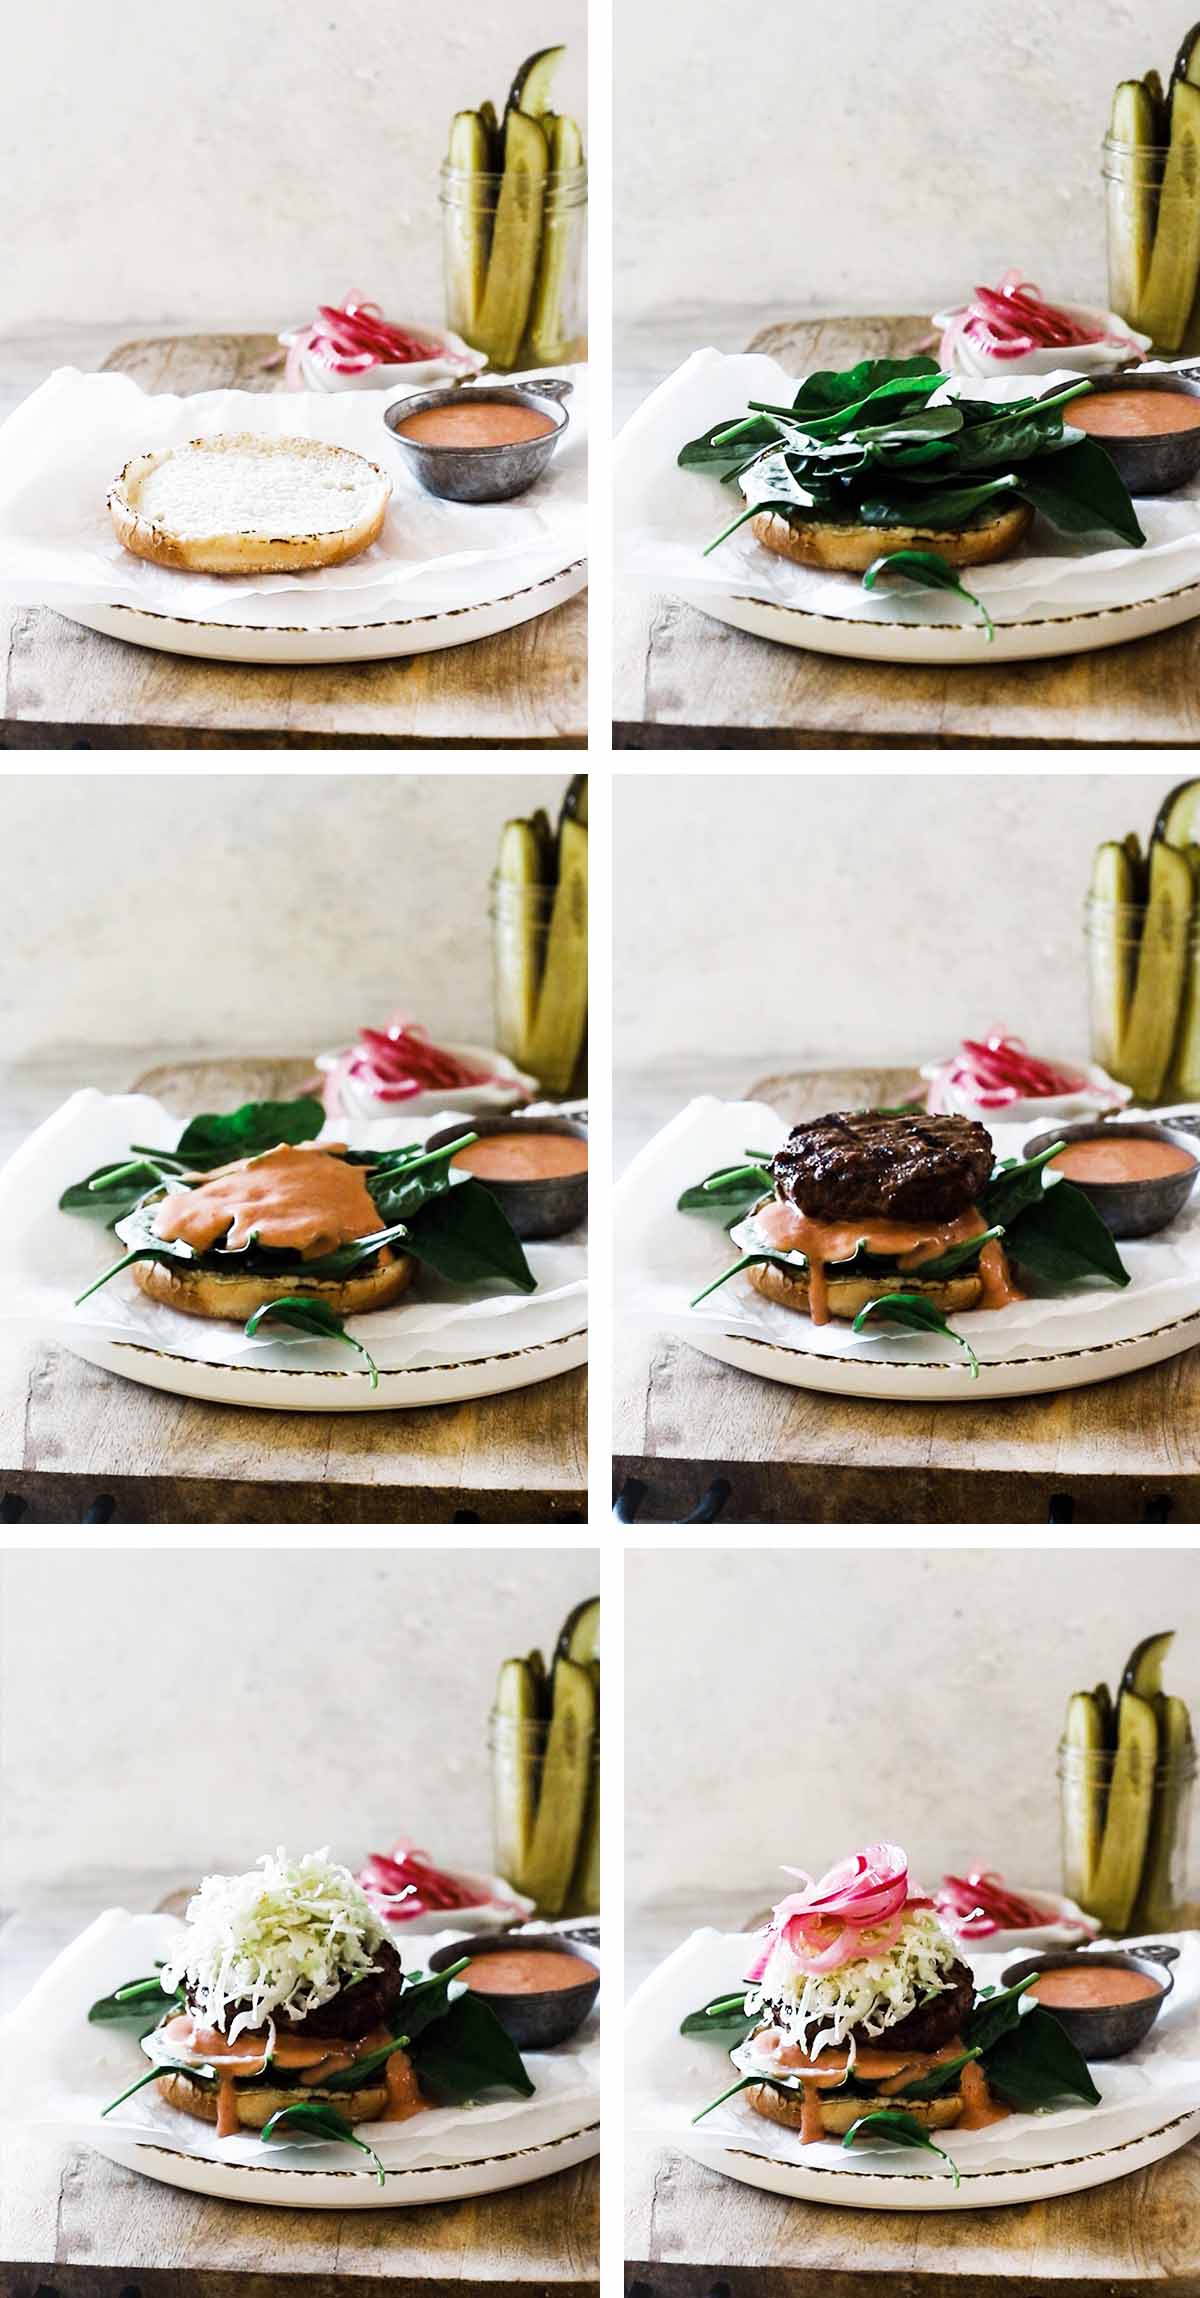 How to build a burger step by step.